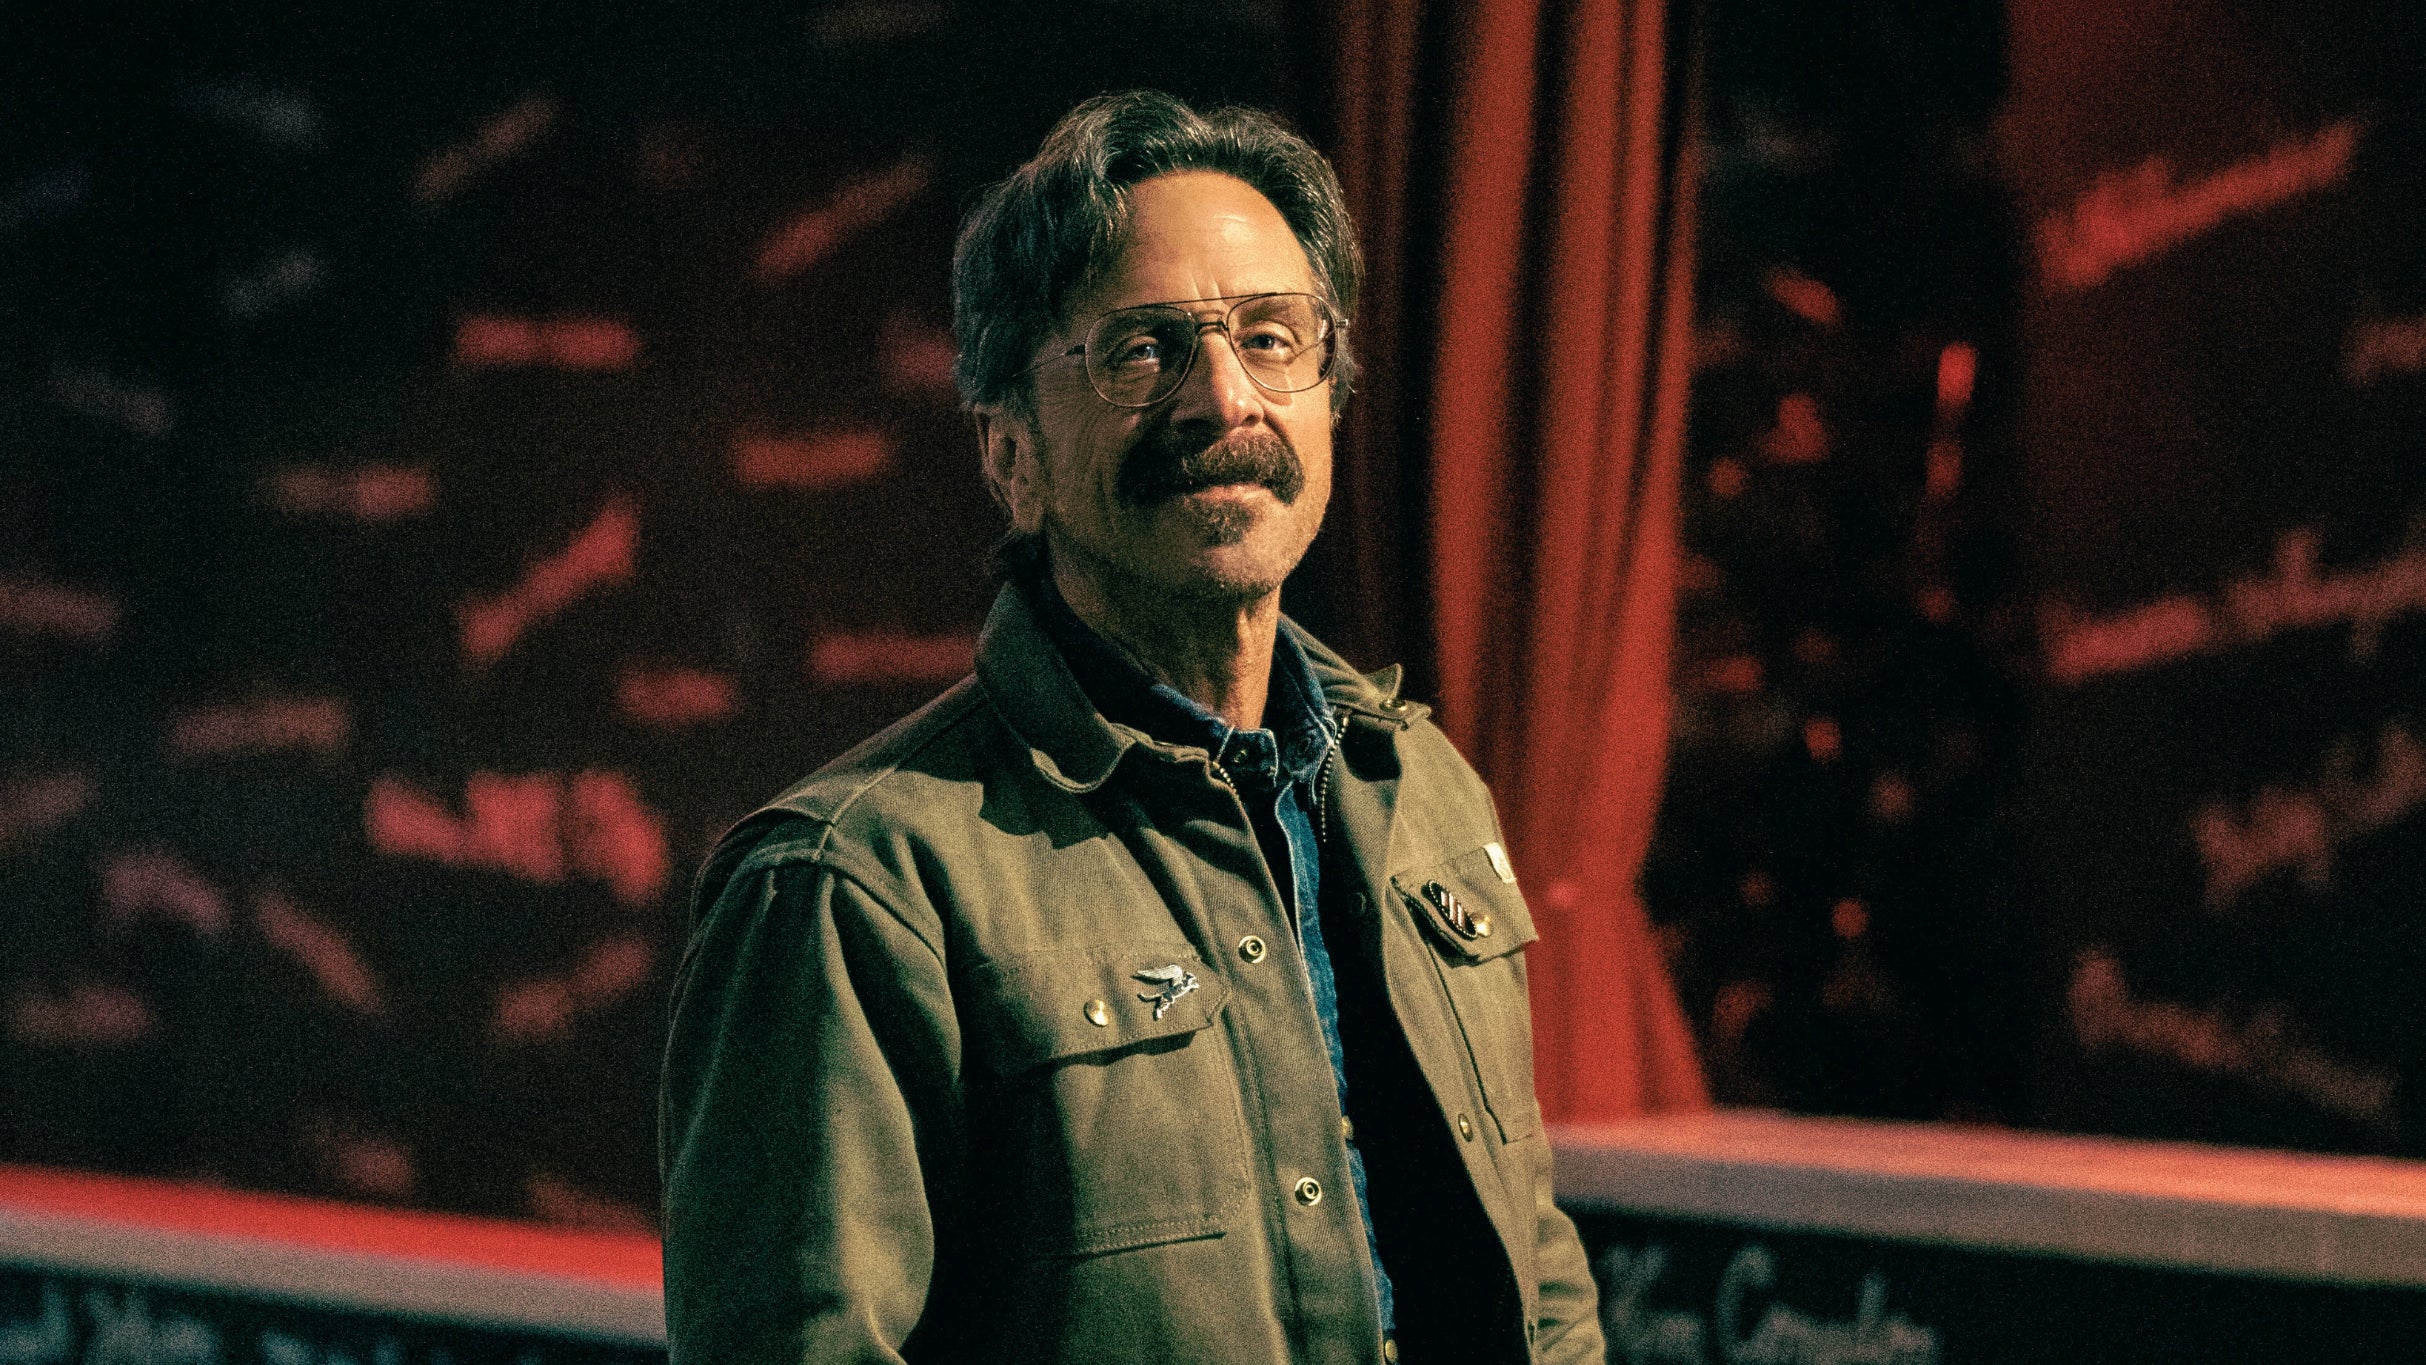 Marc Maron: All In at The Wellmont Theater